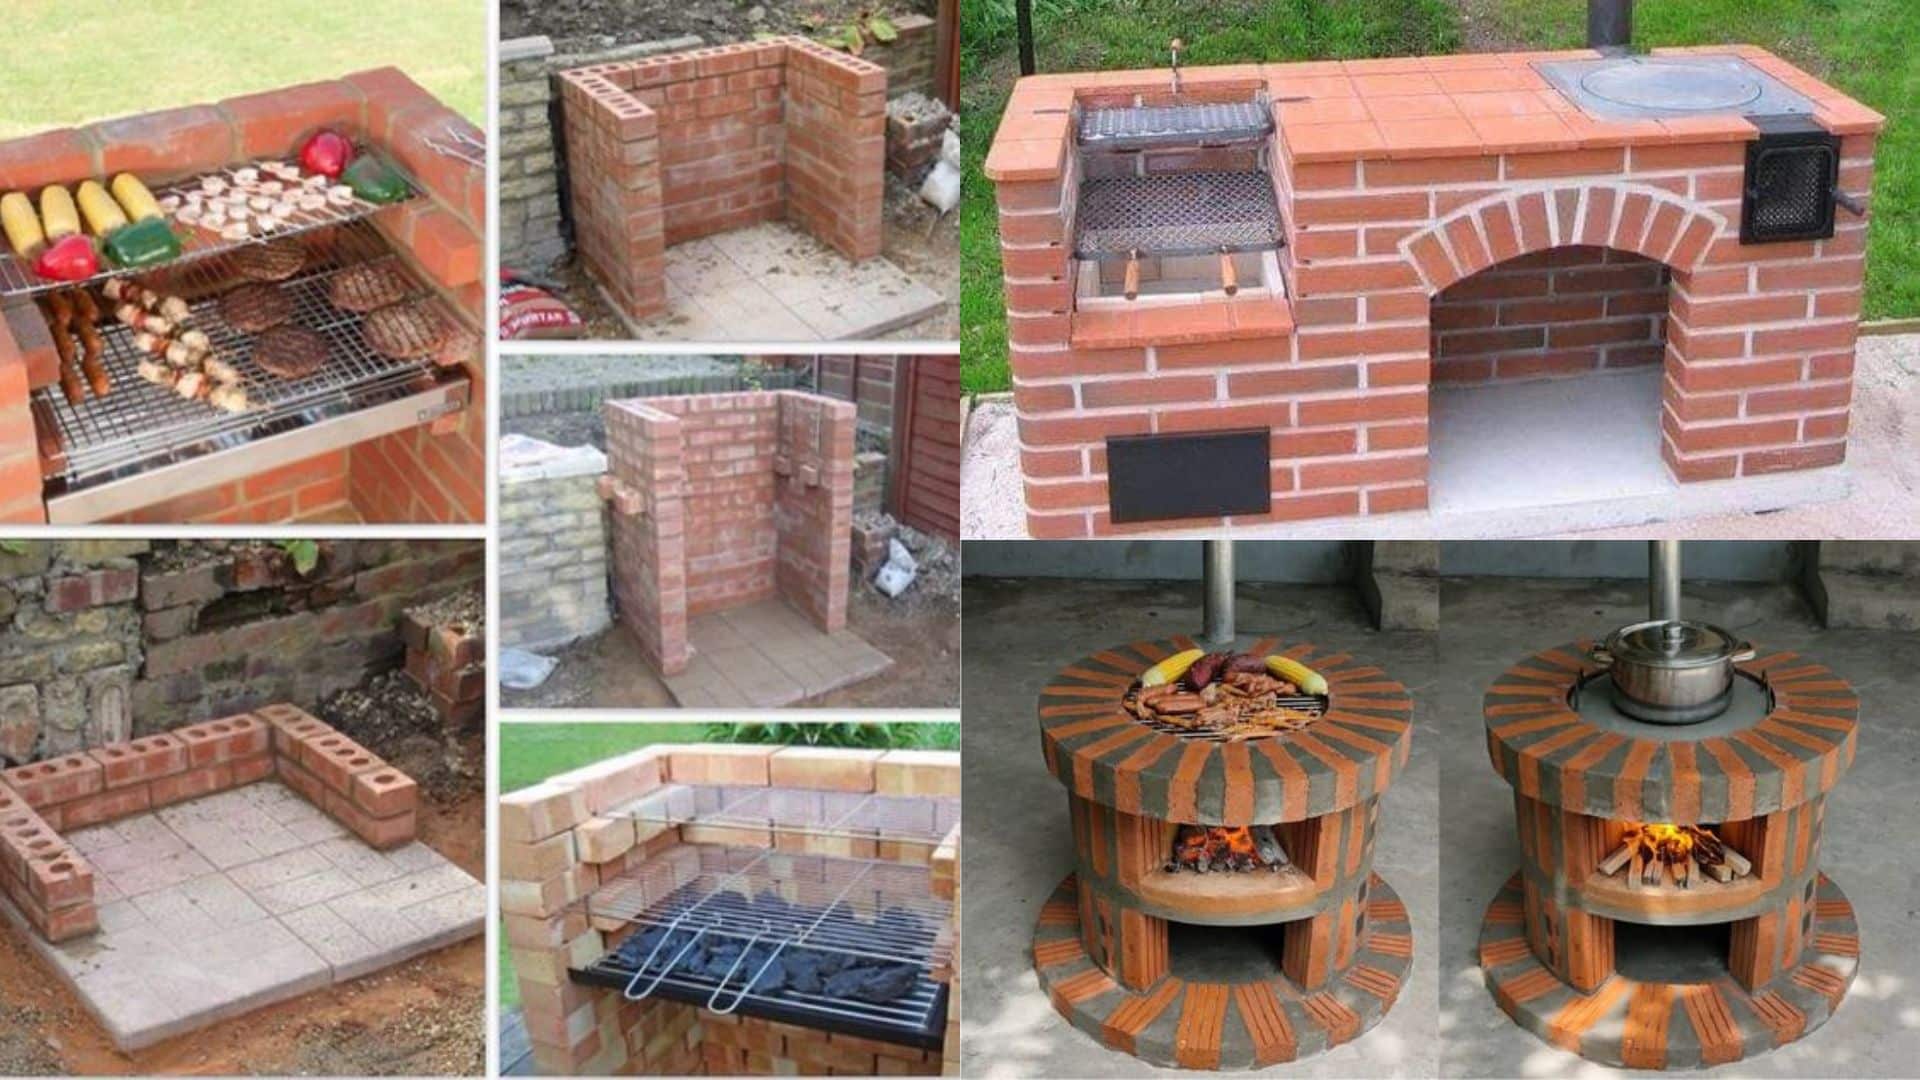 15+ Incredible Ideas of grill made with bricks to make in the garden